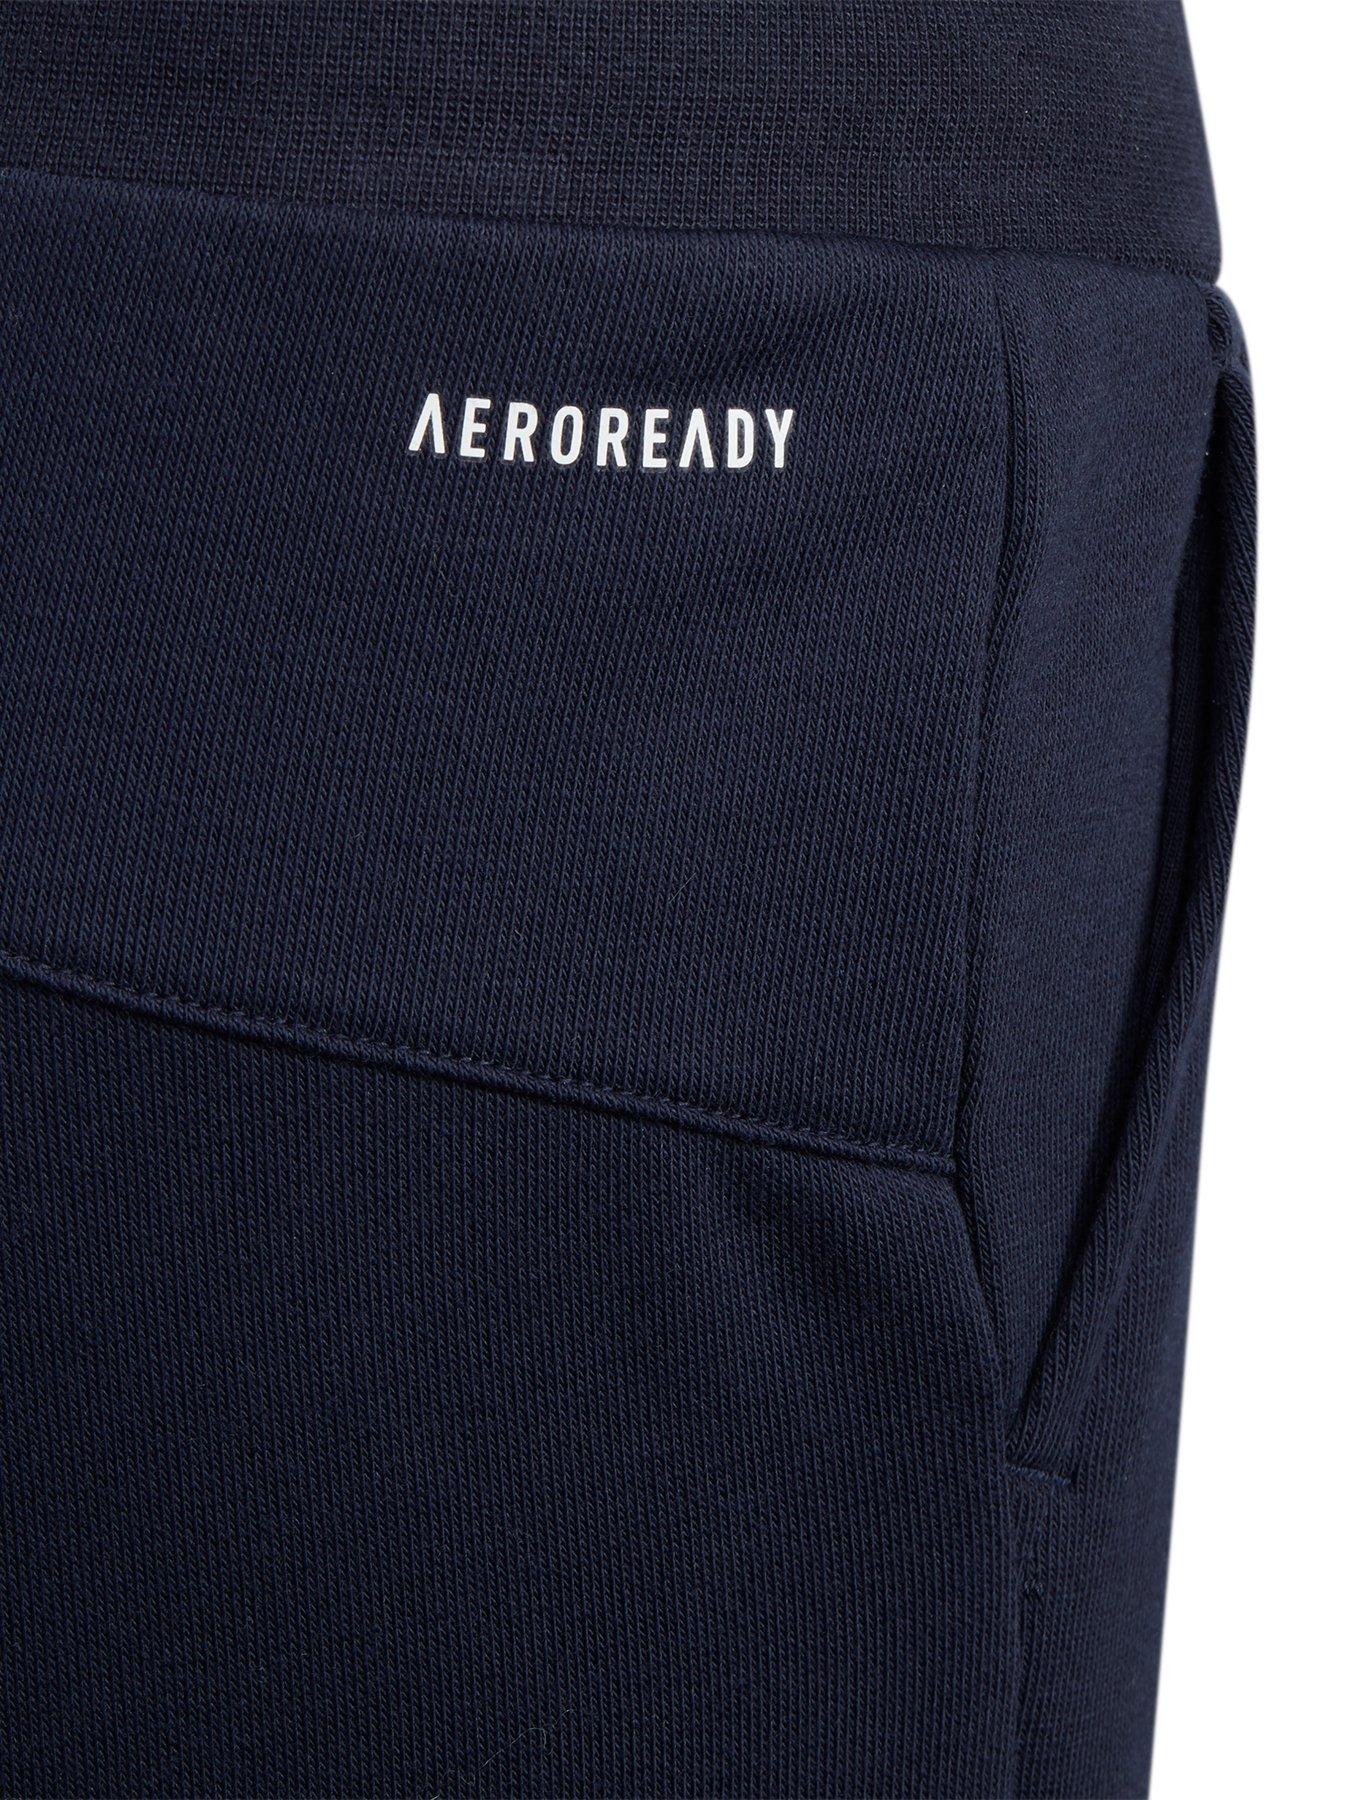  Kids Girls French Terry Knit Pant - Navy